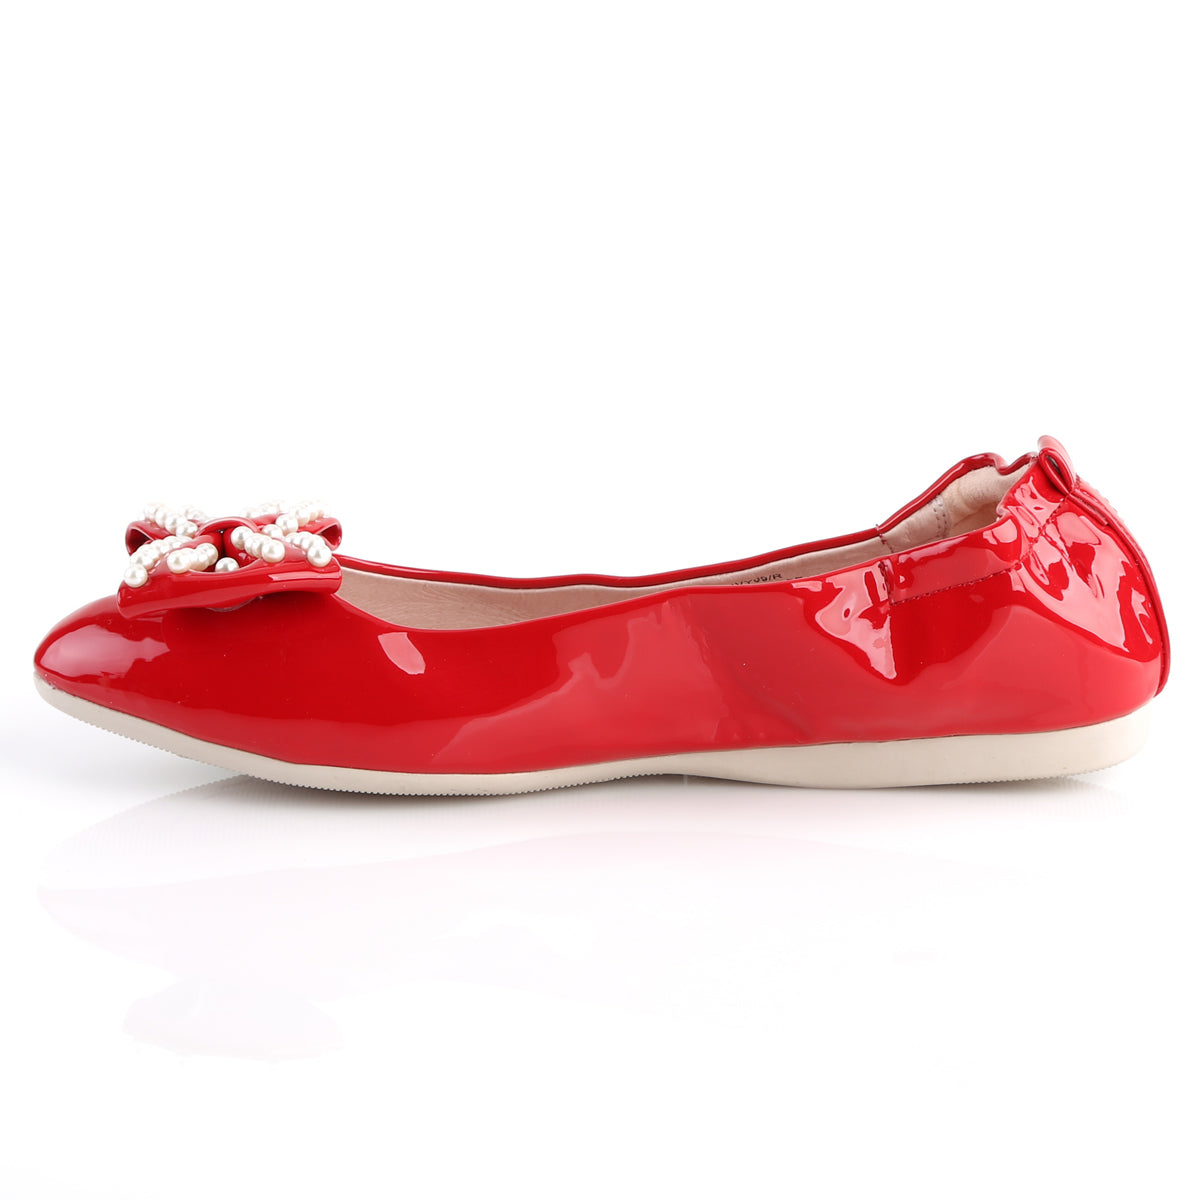 IVY-09 Retro Glamour Pin Up Couture Single Soles Red Pat